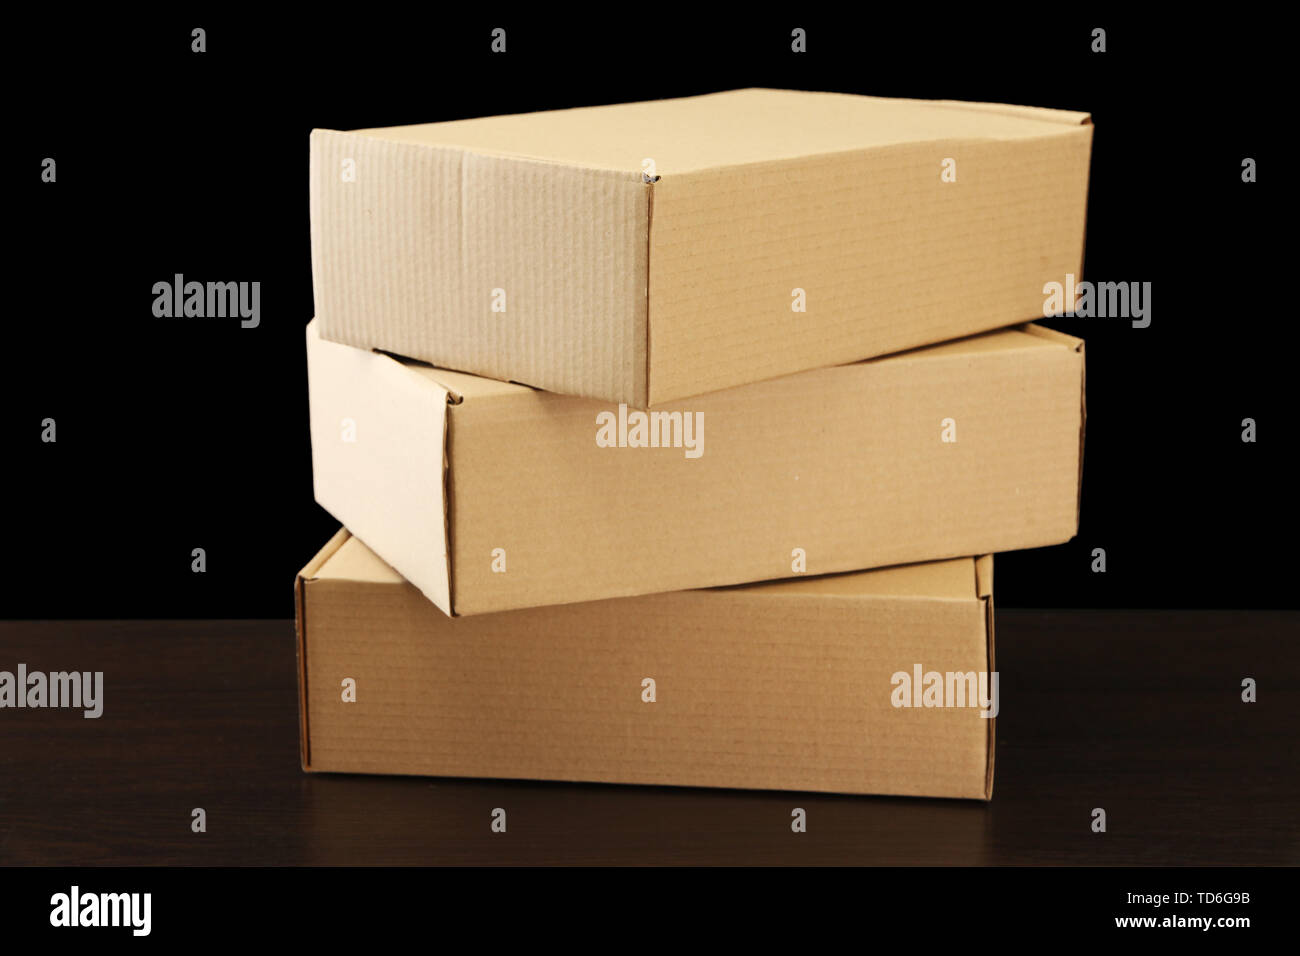 Close Up Three Boxes On The Table Stock Photo, Picture and Royalty Free  Image. Image 84638747.